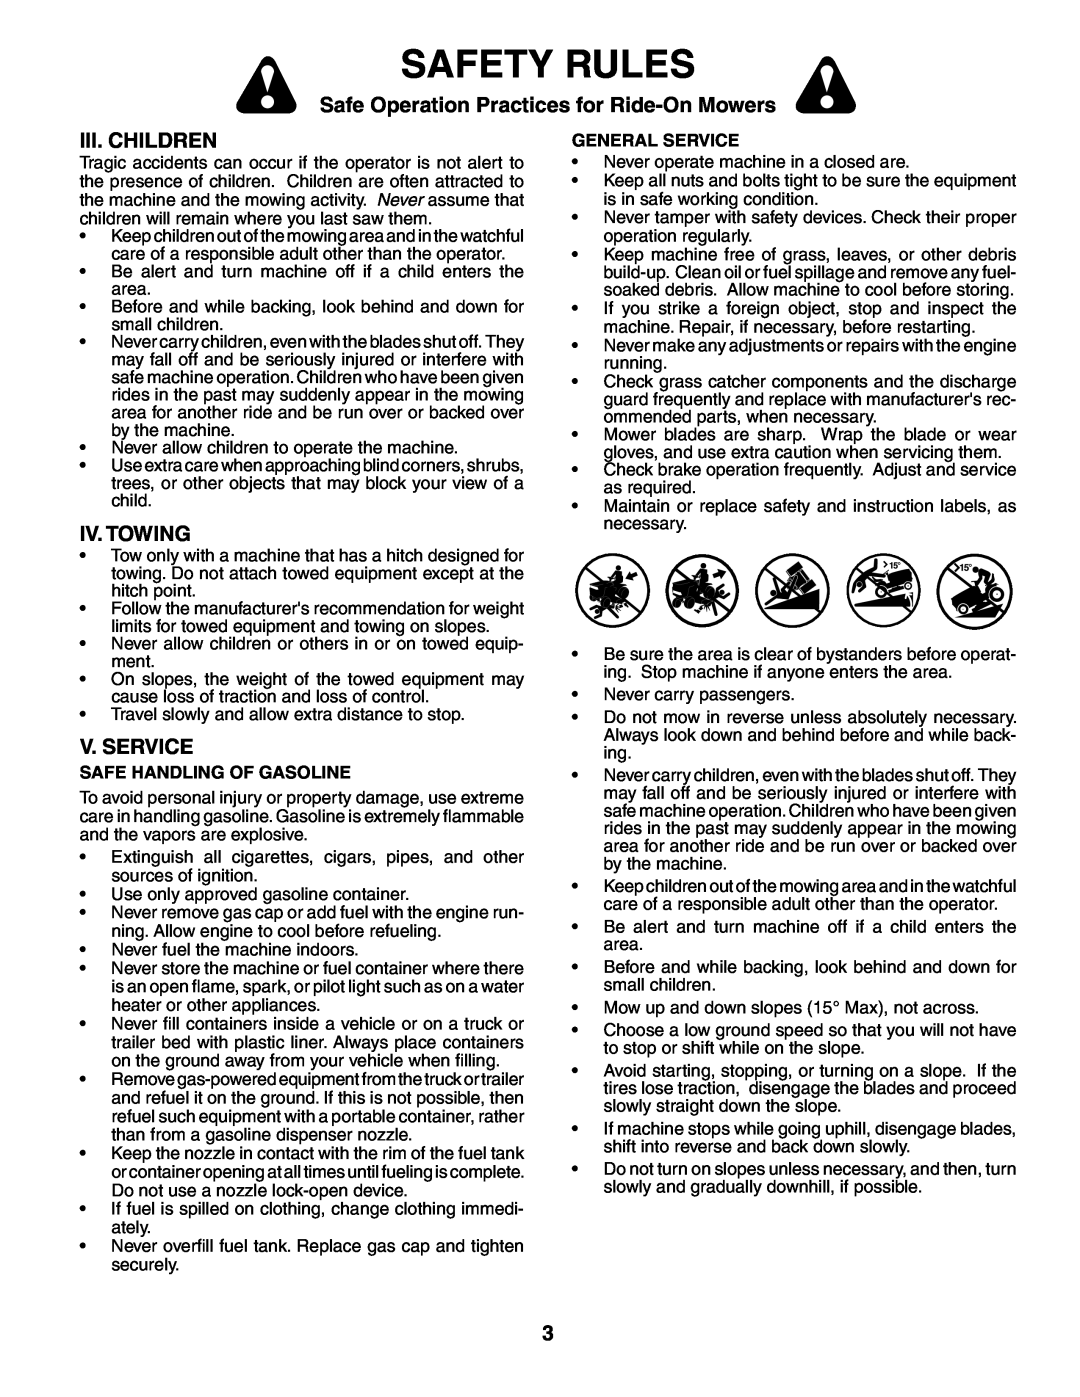 Poulan PK19H42YT manual Iii. Children, Iv. Towing, V. Service, Safety Rules, Safe Operation Practices for Ride-On Mowers 